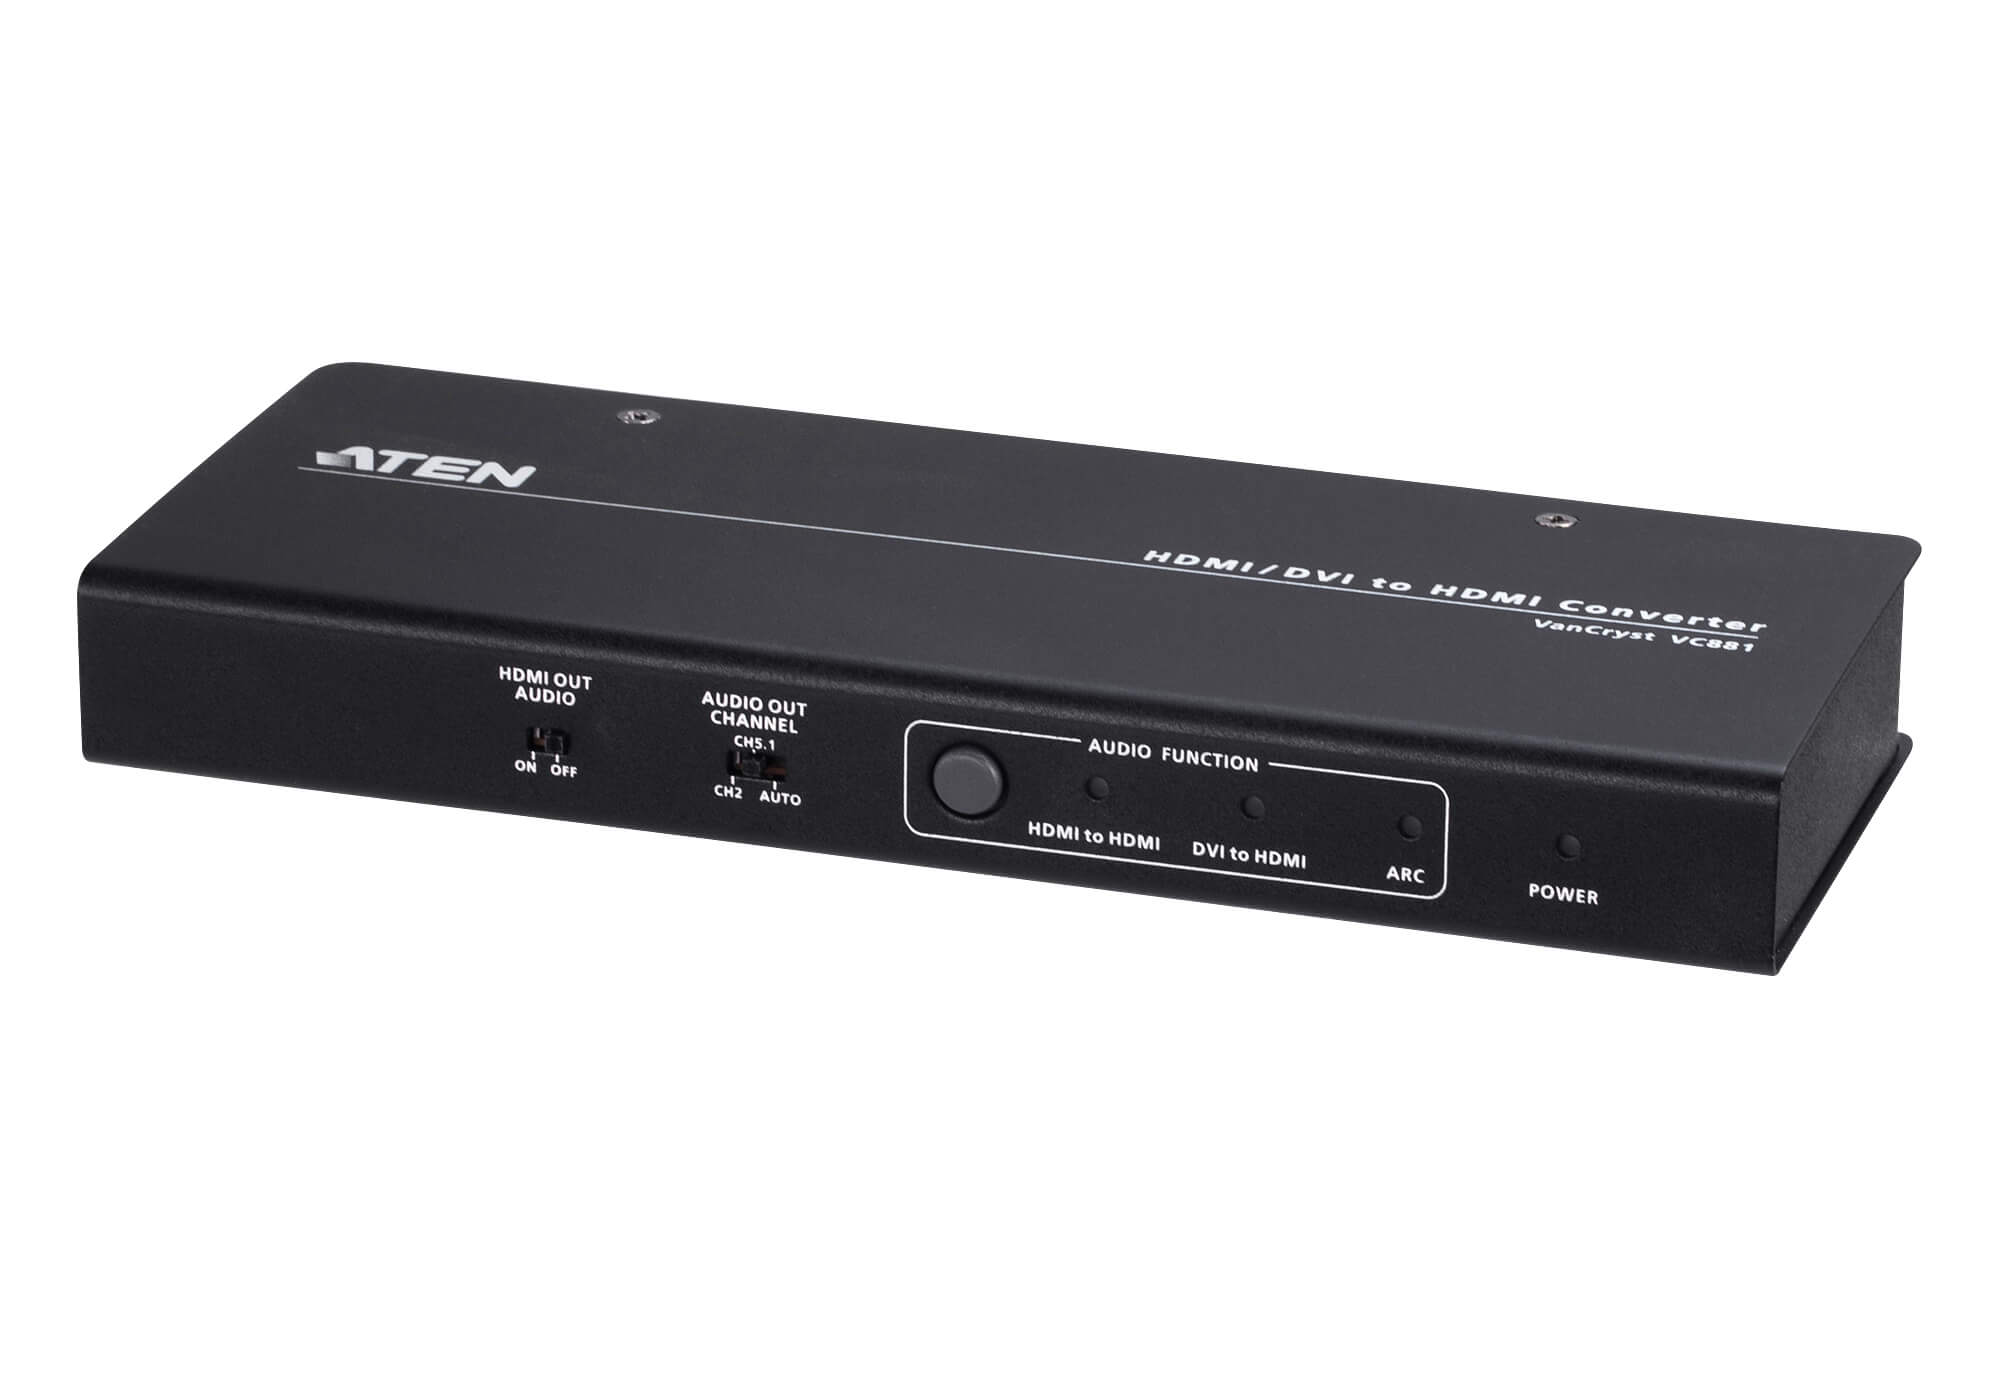 You Recently Viewed Aten VC881 4K HDMI/DVI to HDMI Converter Image